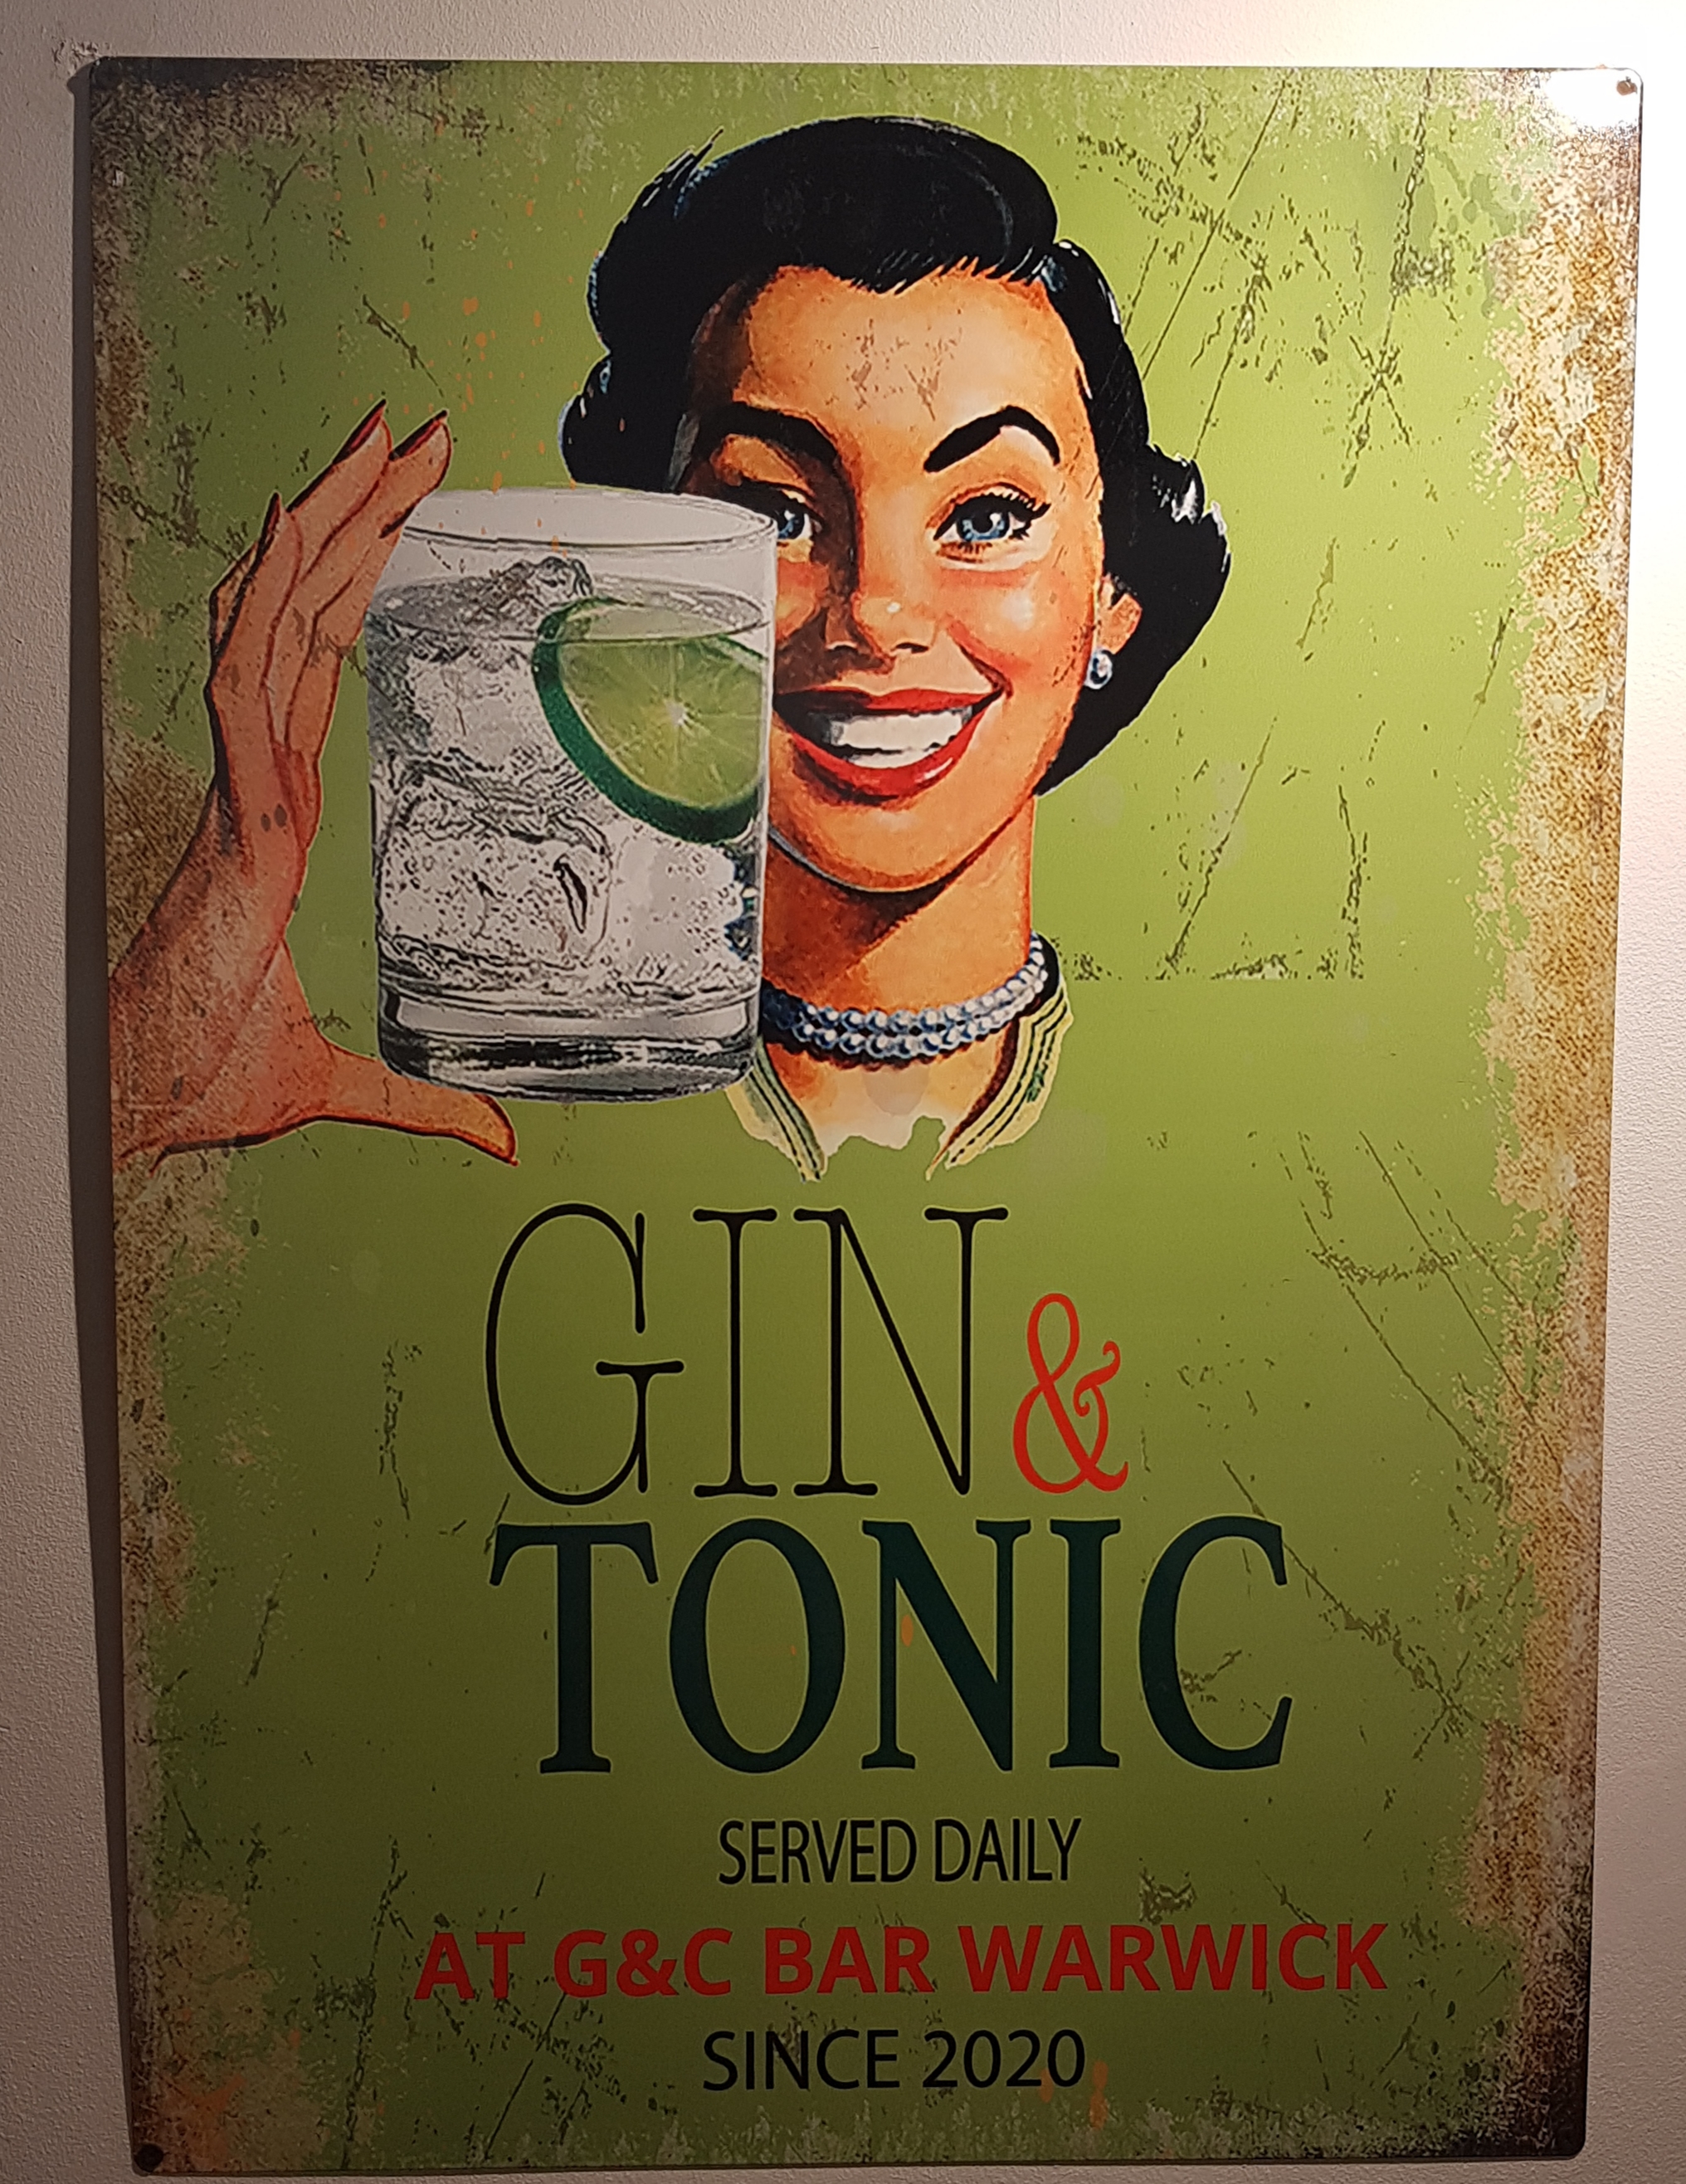 The Travel love… Locker gin! and is you need – All